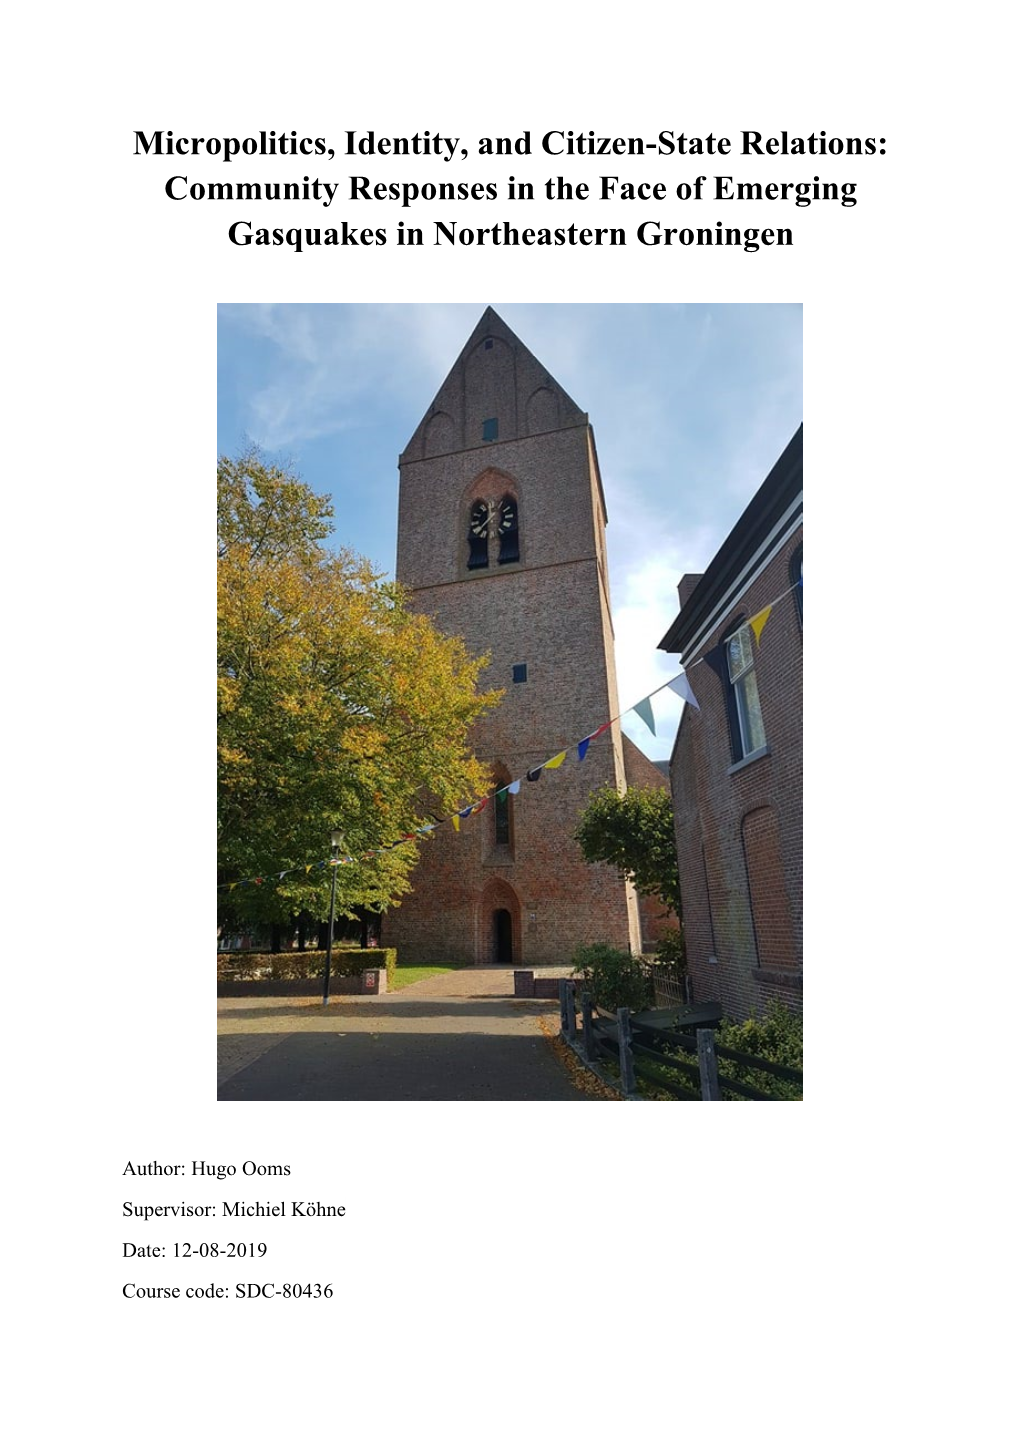 Micropolitics, Identity, and Citizen-State Relations: Community Responses in the Face of Emerging Gasquakes in Northeastern Groningen